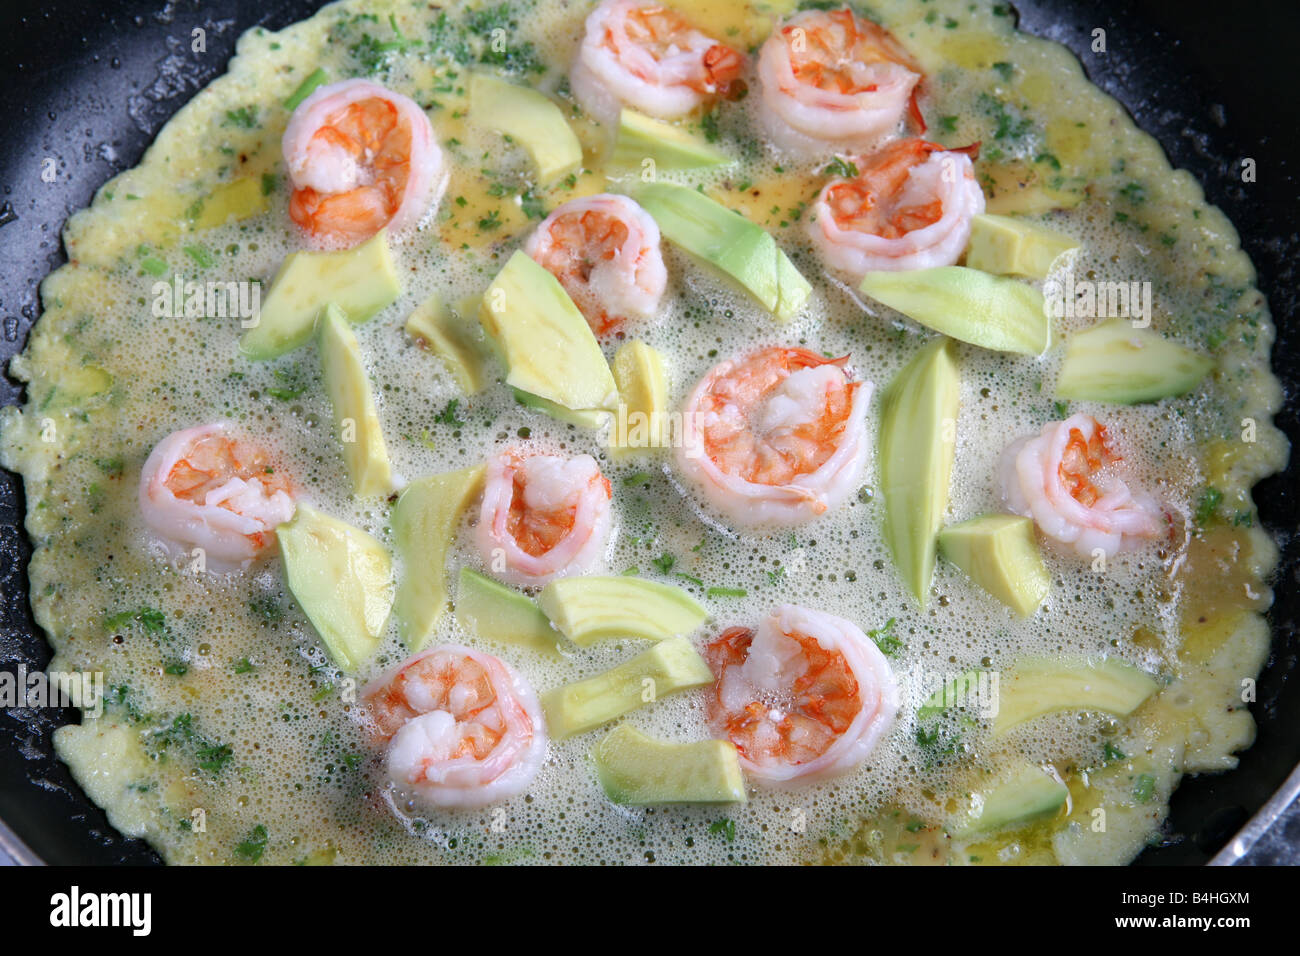 A 'California omlette' with parsley shrimps and avocado being cooked in a frying pan Stock Photo